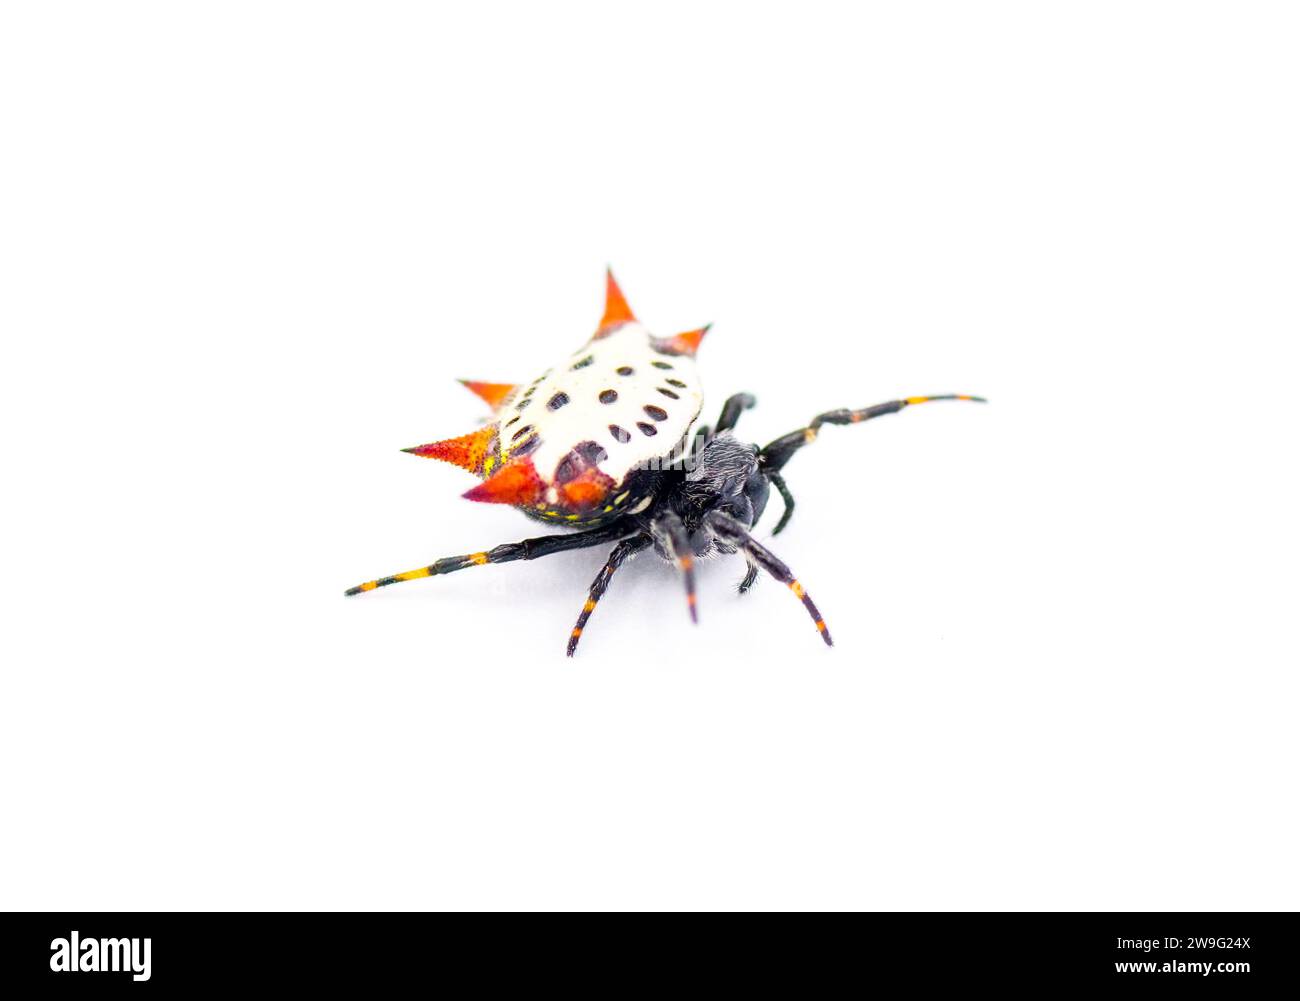 Spiny backed orb weaver spider - Gasteracantha cancriformis - aka crab or kite spider crawling right leg extended view isolated on white background Stock Photo